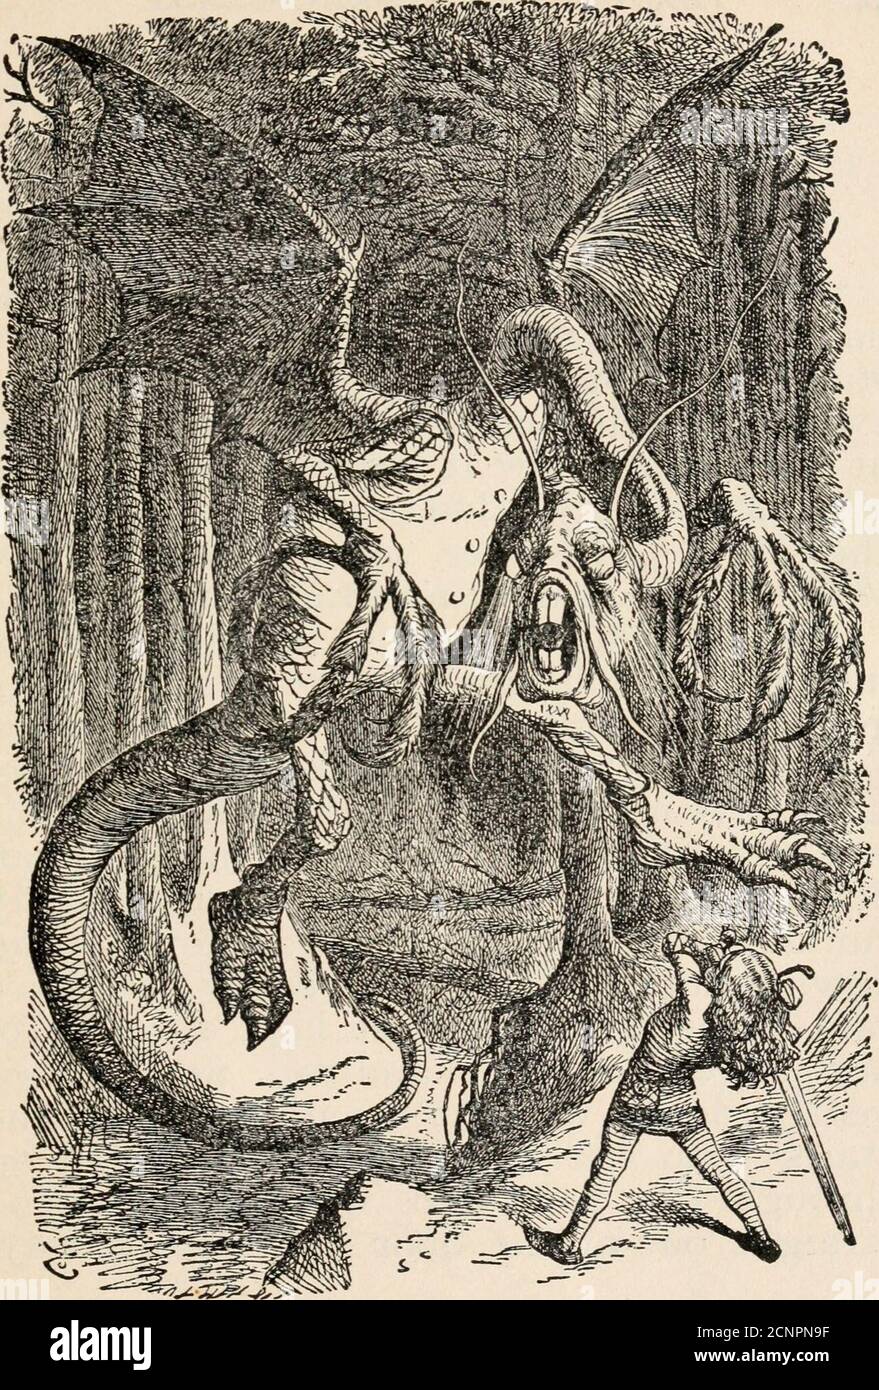 . Through the looking glass : and what Alice found there . I hold it up to a glass, the words will all gothe right way again.This was the poem that Alice read: JABBERWOCKY. Twas brillig, and the slithy toves Did gyre and gimble in the wabe ;All mimsy were the borogoves^ And the mome raths outgrabe. |2 THRO UGH THE LOOKING-GLASS. ^Beware the Jabber wo ck, my son! The jaws that bite, the claws that catch IBeware the Jubjub bird, and shunThe frumious Bander snatch ! He took his vorpal sword in hand: Long time the manxome foe he sought—So rested he by the Tiimtum tree,And stood awhile in thought. Stock Photo